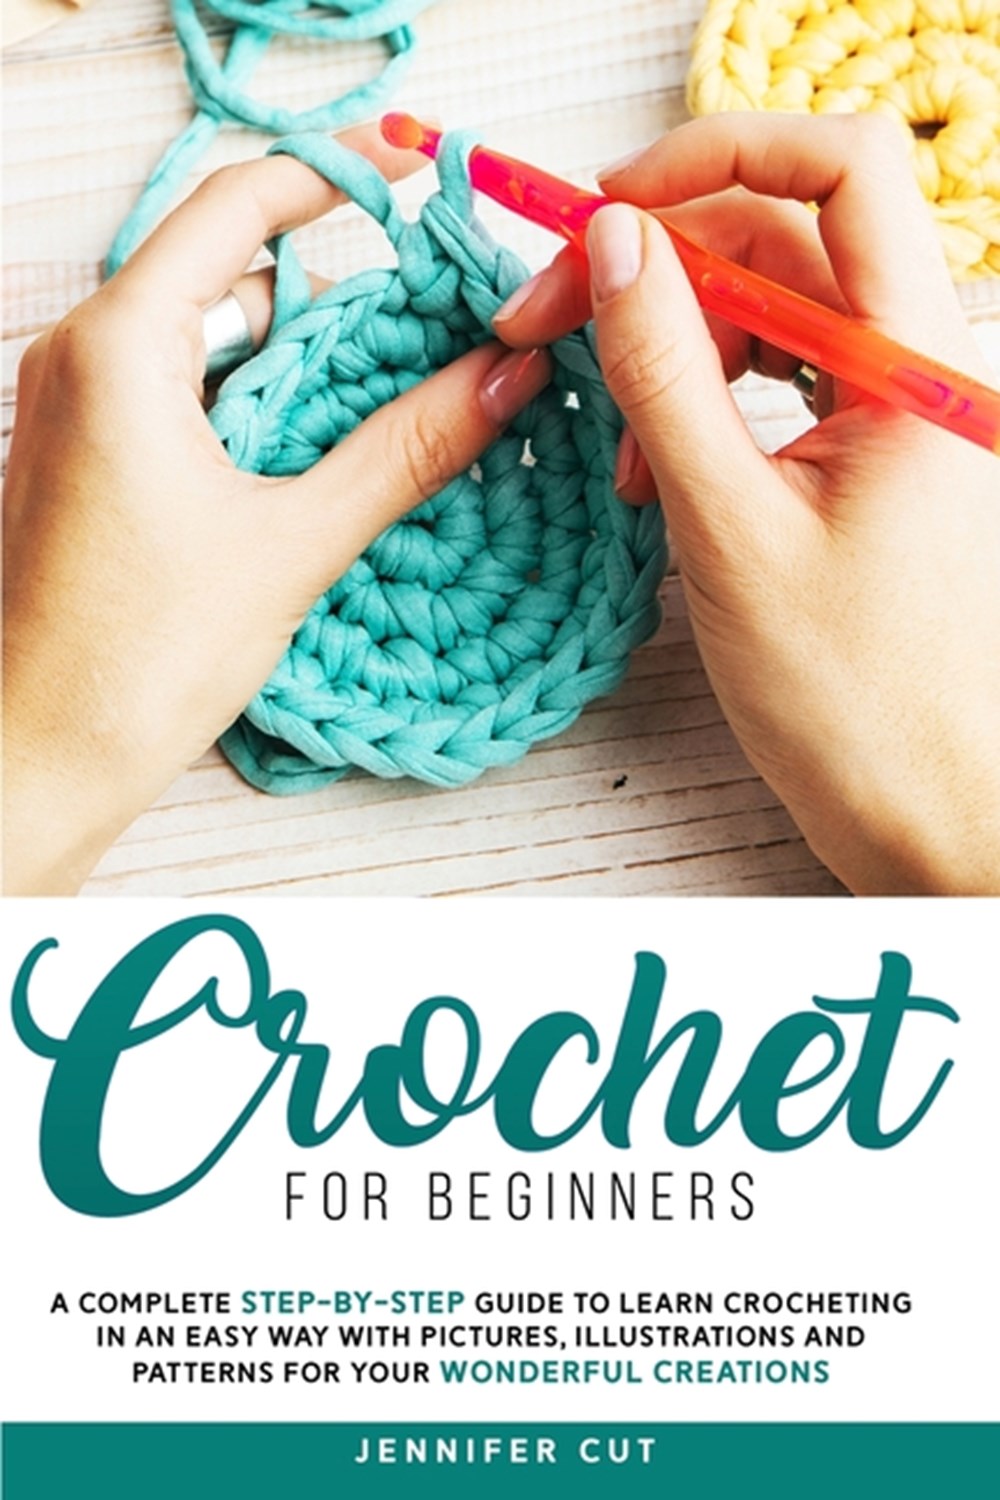 Crochet for Beginners: A Complete Step-By-Step Guide To Learn Crocheting In An Easy Way With Picture